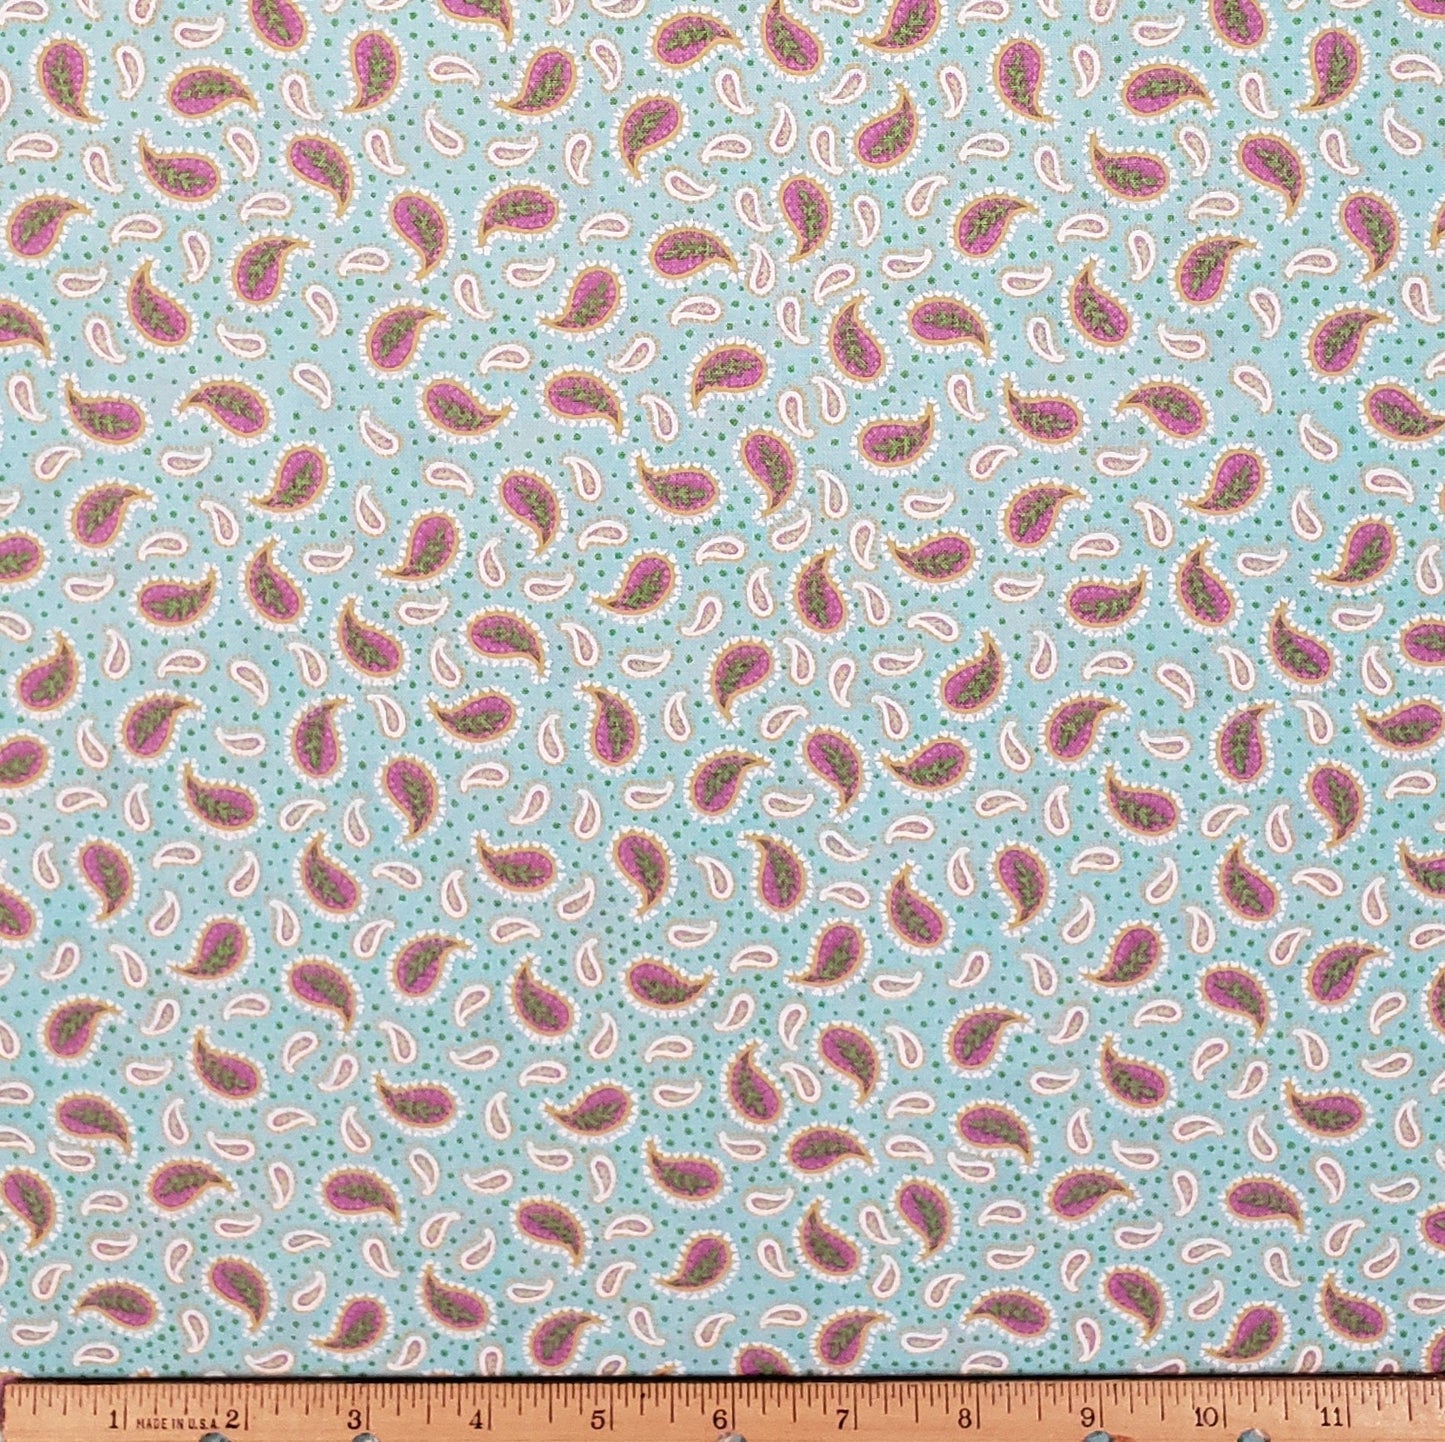 Brother Sister Design Studio 2007 "Happy Tidings" - Light Blue Fabric / Bright Green Dots and Lavender Paisley Print Fabric